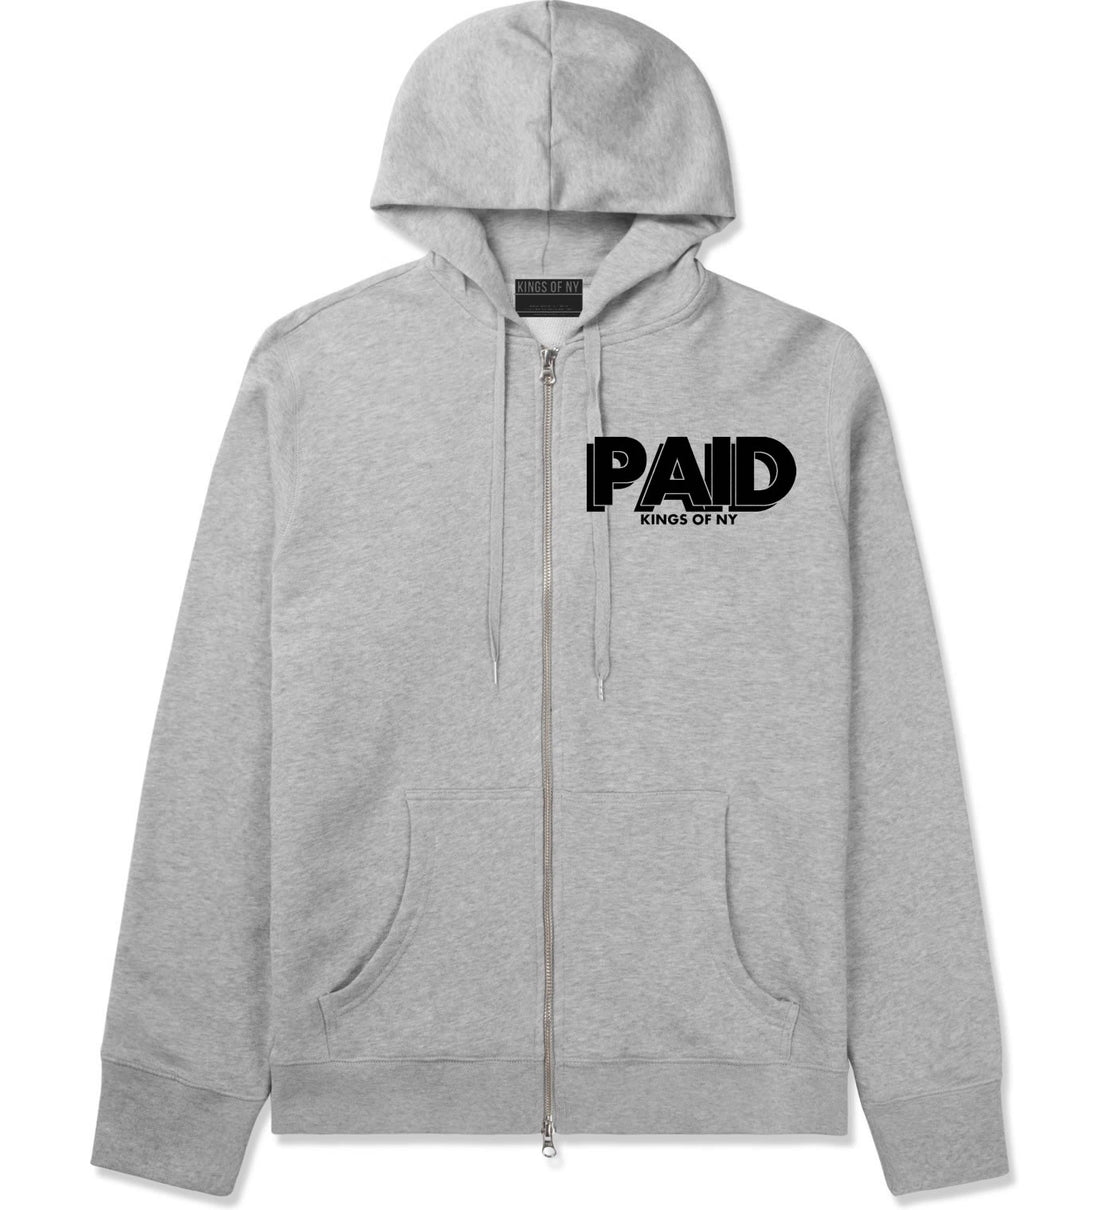 PAID Kings Of NY W15 Zip Up Hoodie in Grey By Kings Of NY